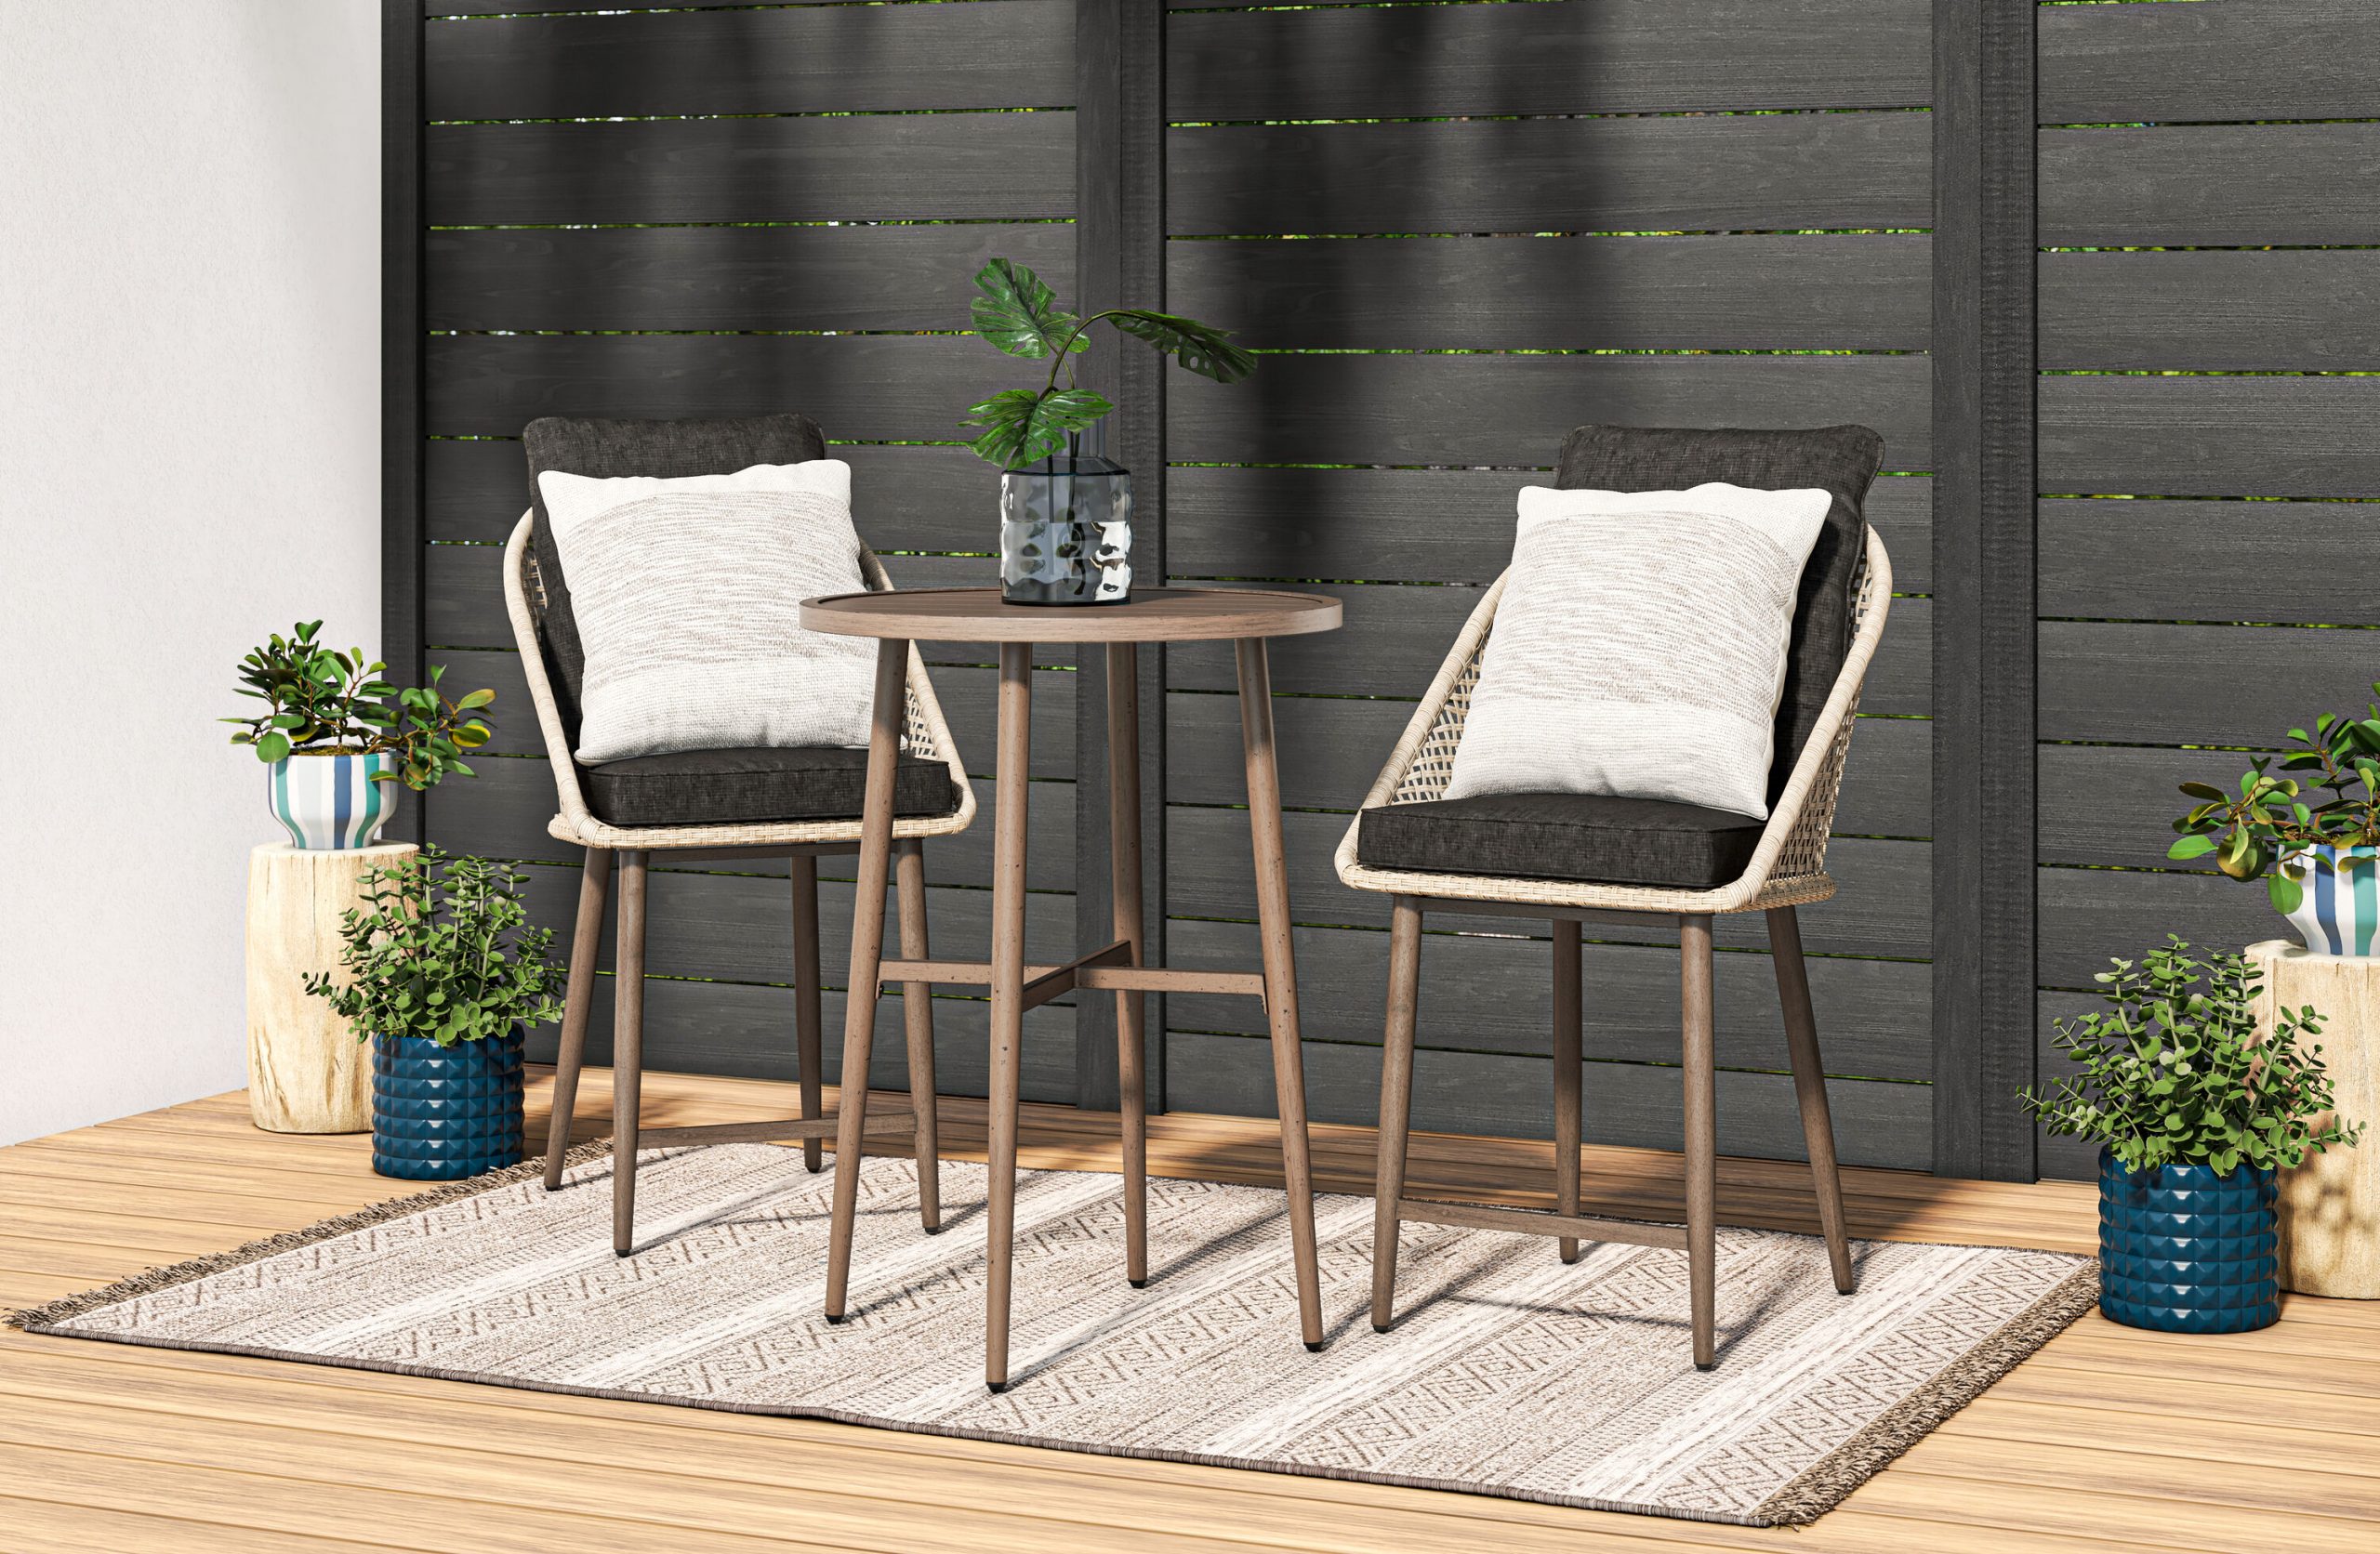 How to Choose the Best Outdoor Furniture for Your Balcony